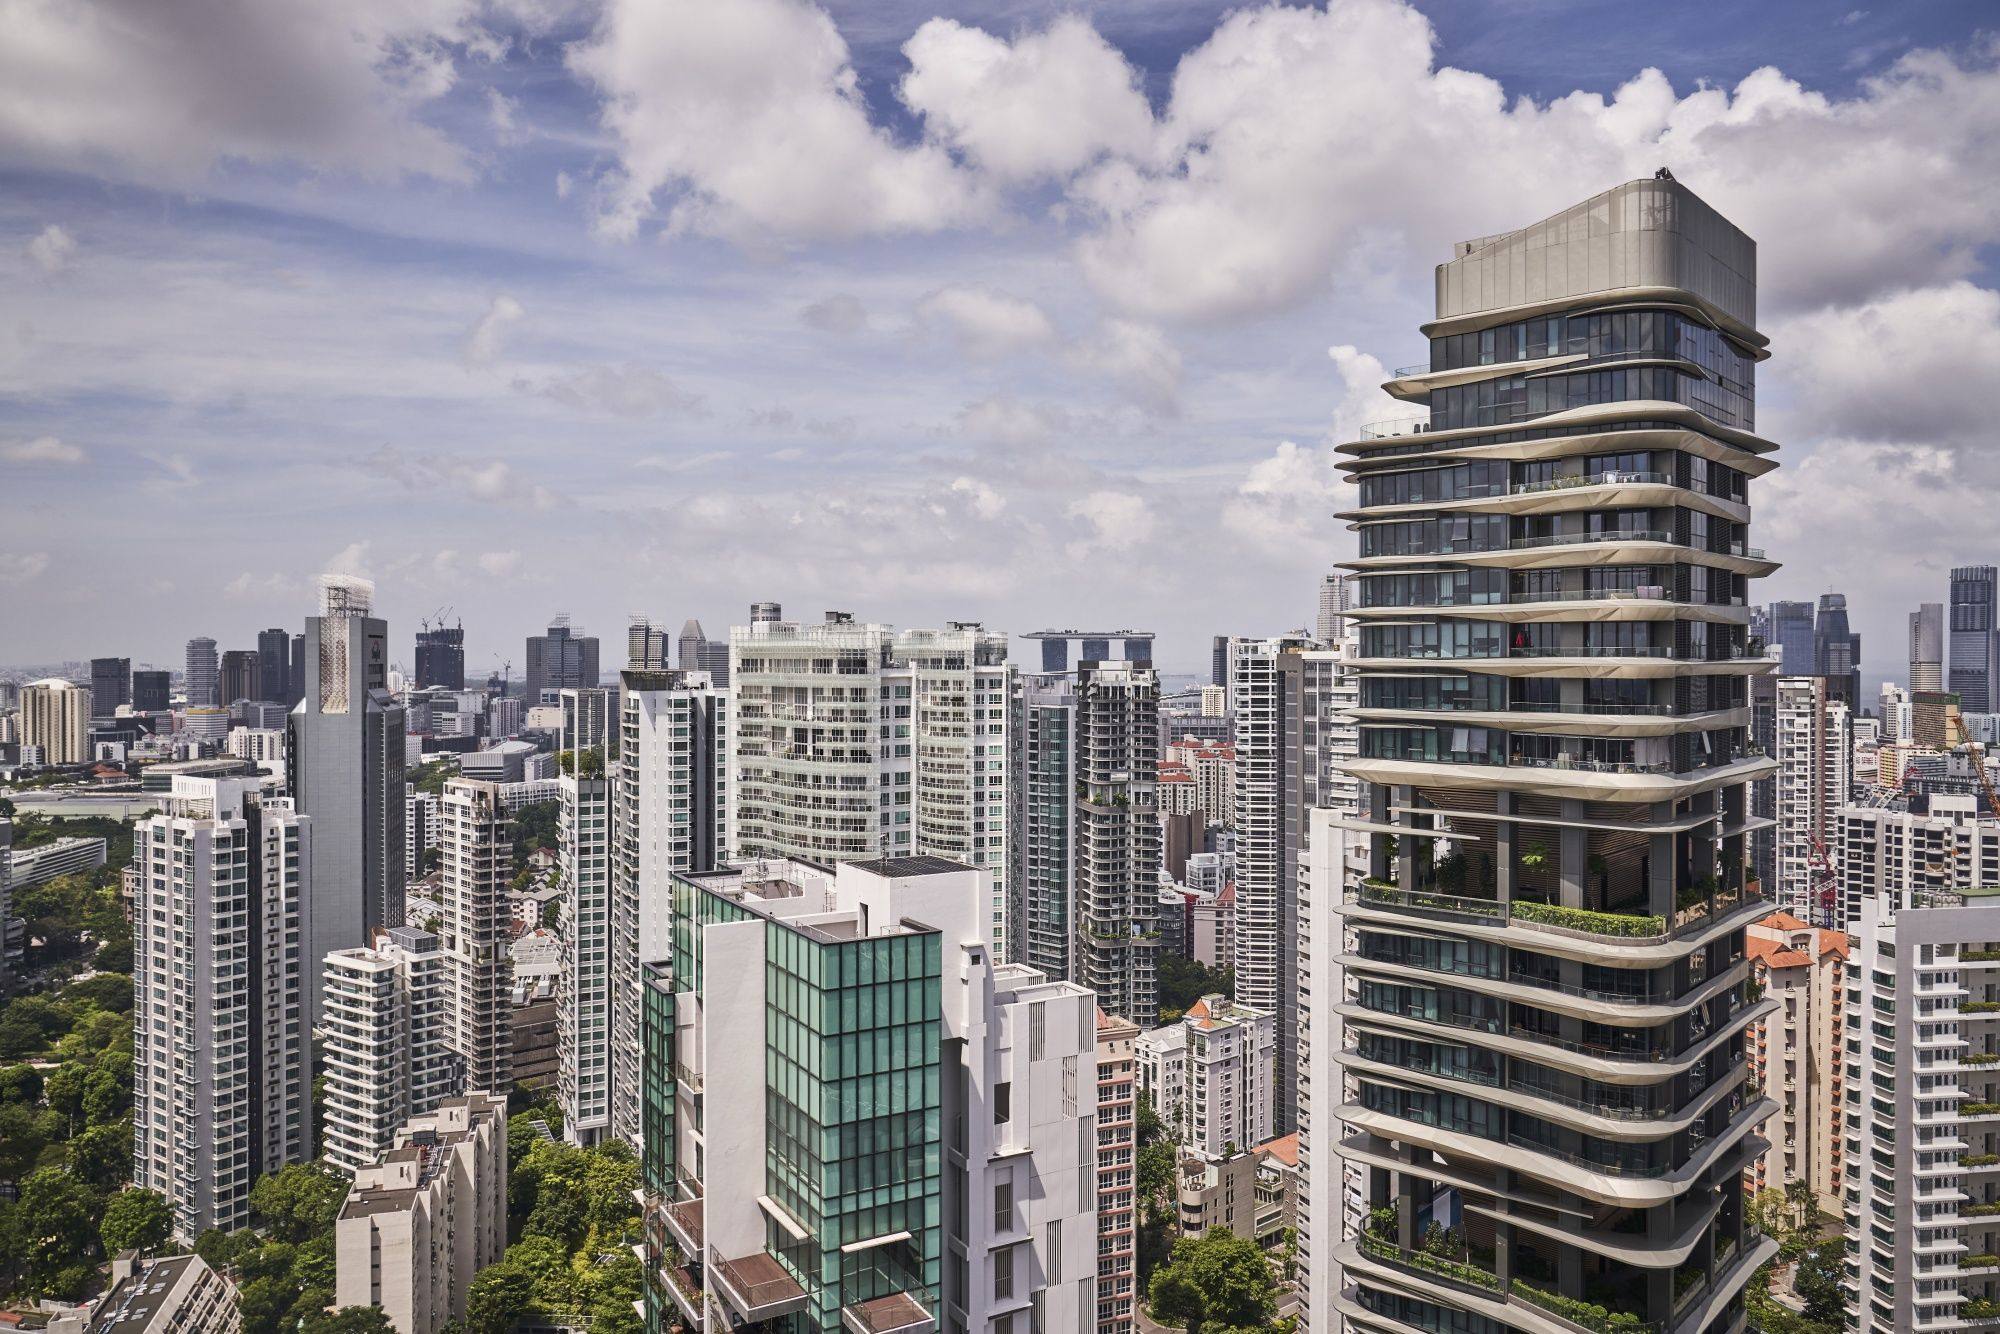 Private homes in the River Valley and Orchard area of Singapore are seen on July 9, 2022. Last year, private property prices in the city-state grew 8.6 per cent, compared with 10.6 per cent in 2021. Photo: Bloomberg